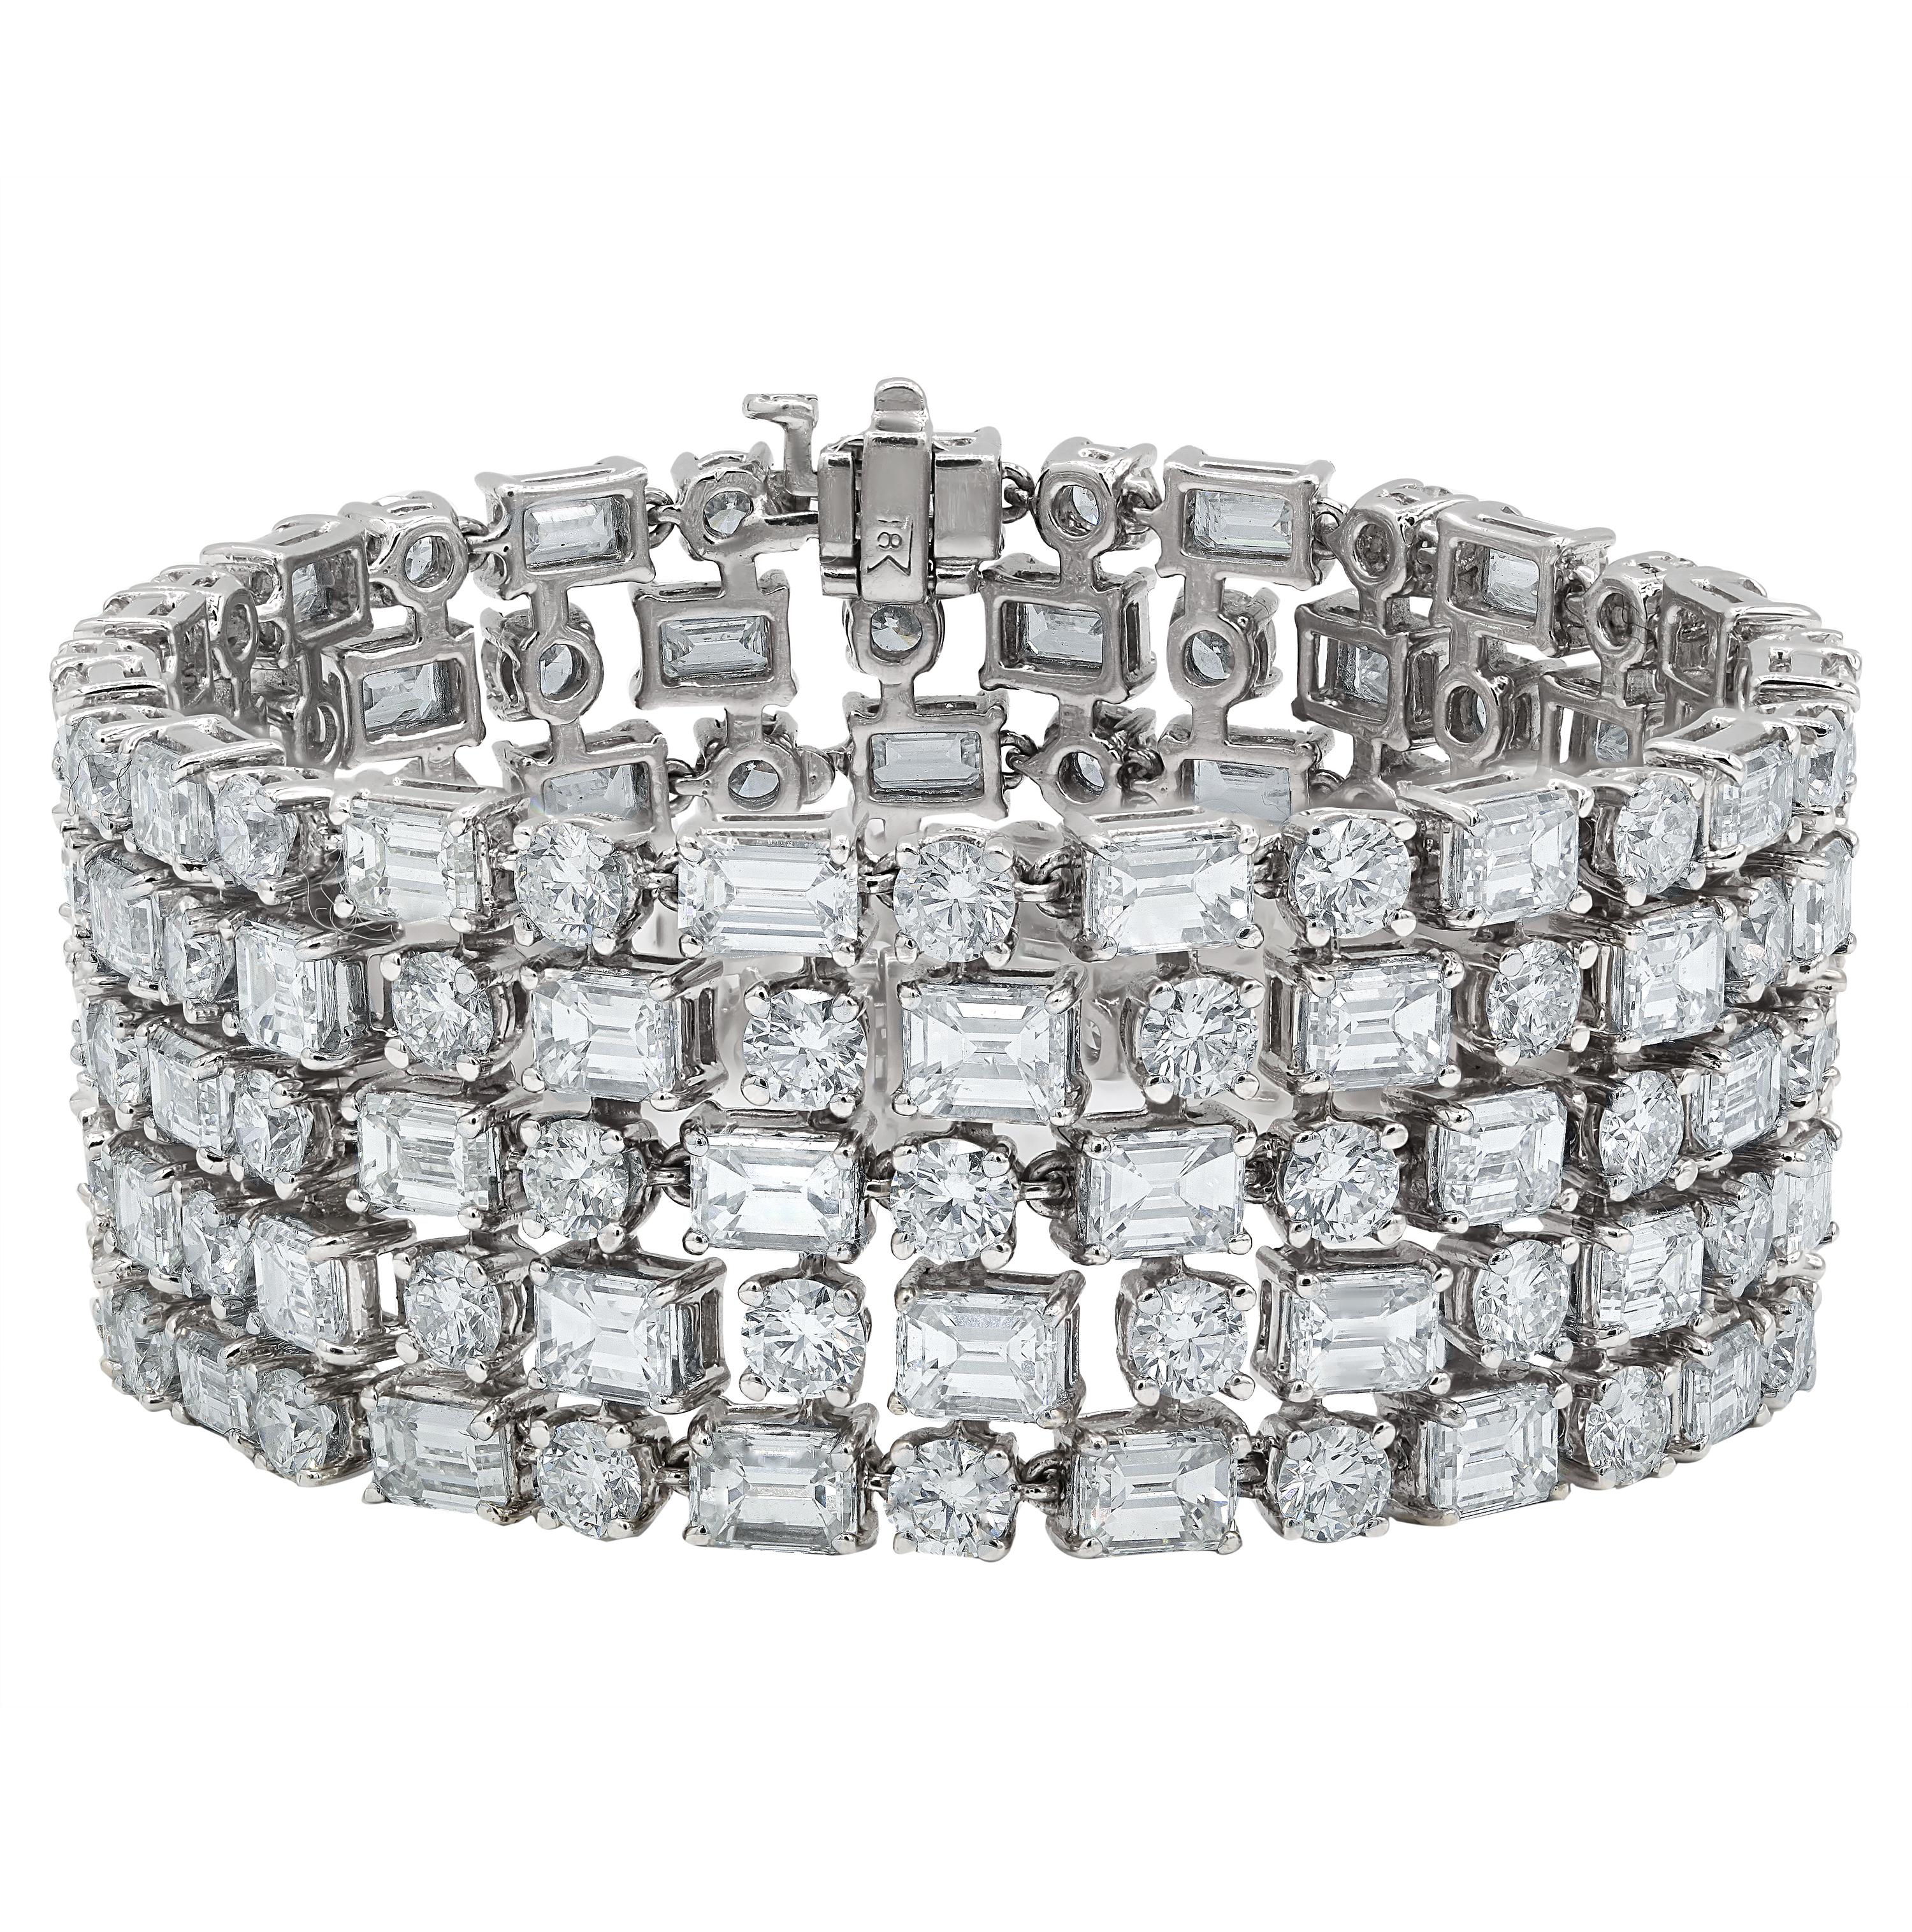 18kt white gold bracelet featuring 50.00 cts of emerald cut and round diamonds (G/H/I  VVS/VS) creating a five row design
Diana M. is a leading supplier of top-quality fine jewelry for over 35 years.
Diana M is one-stop shop for all your jewelry